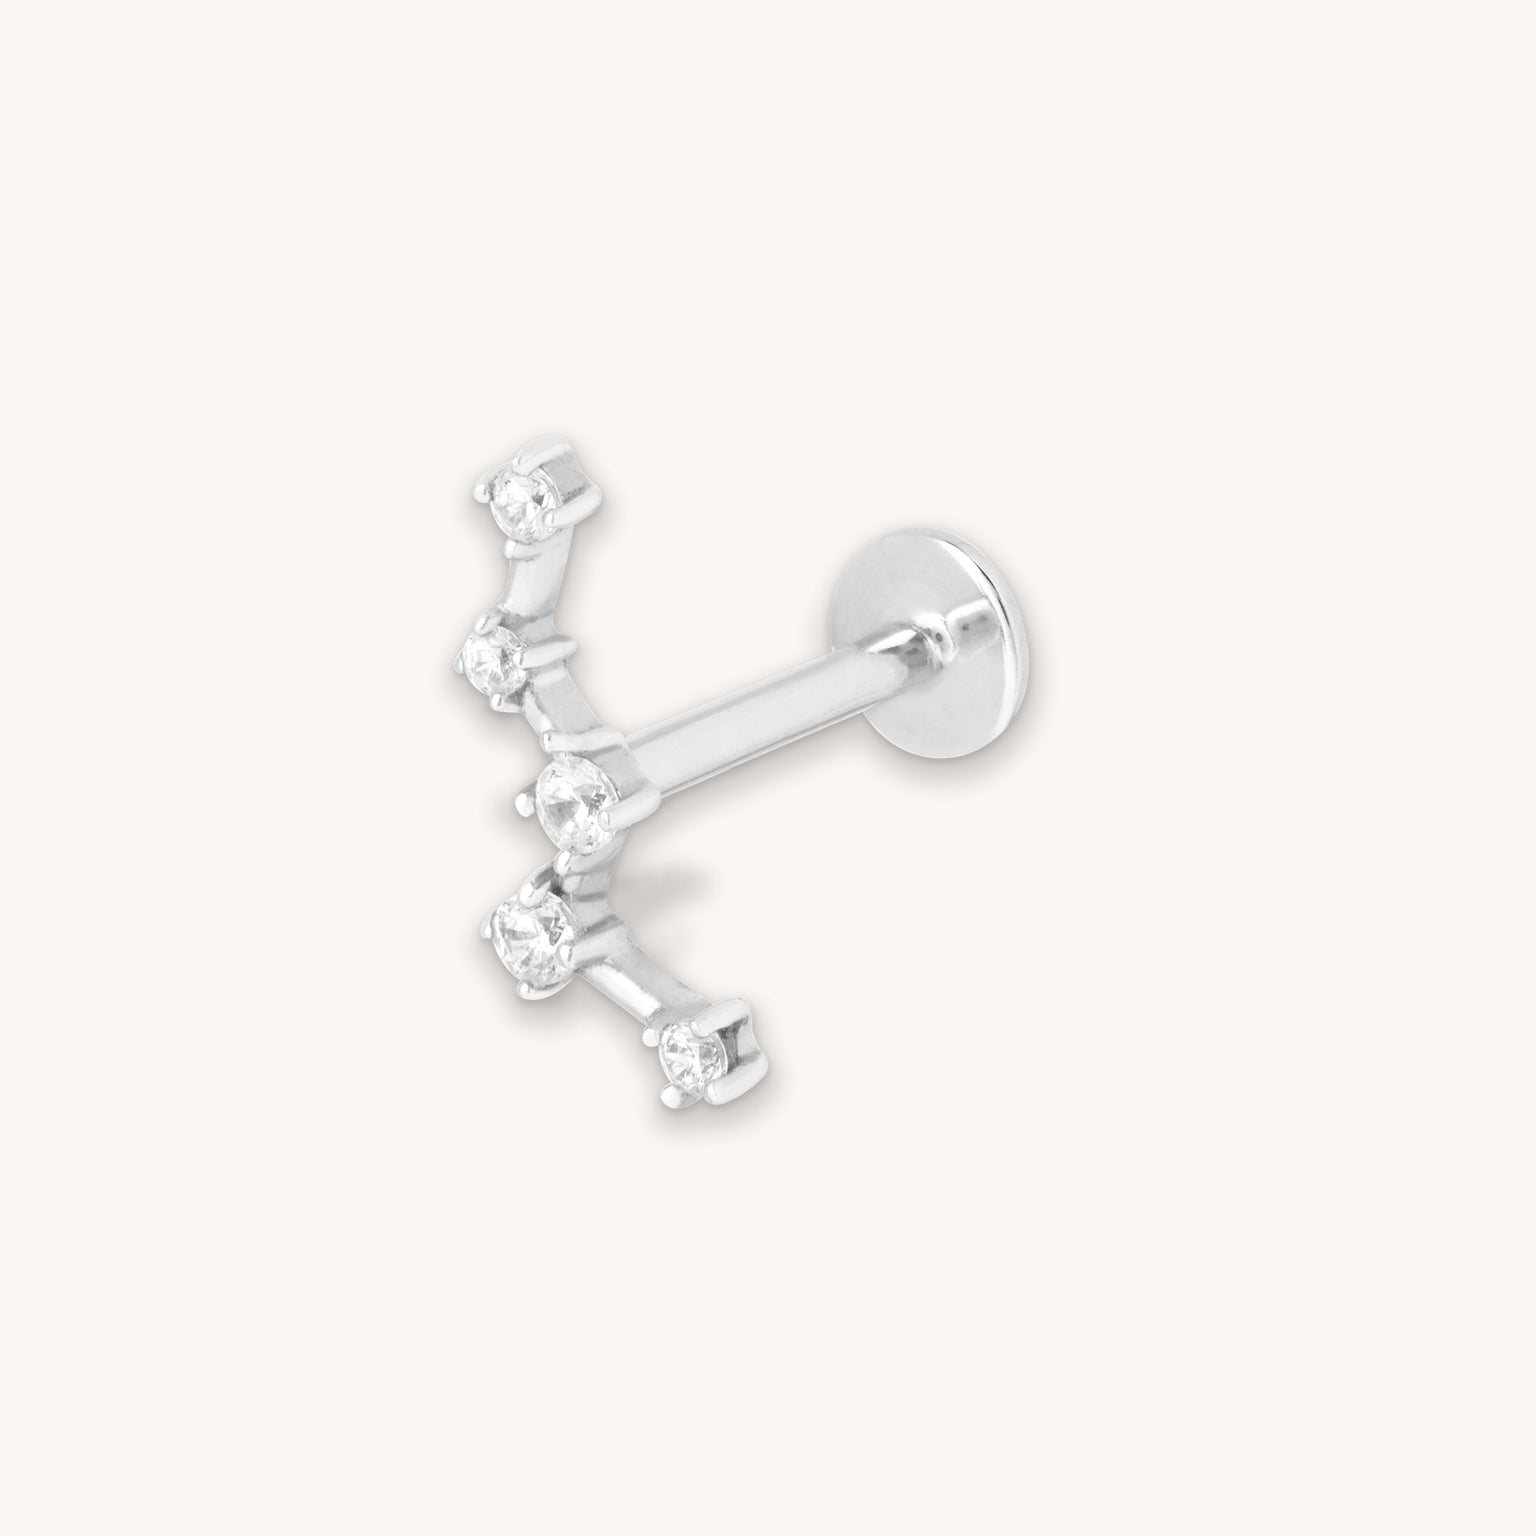 Constellation Piercing Stud 6mm in Solid White Gold